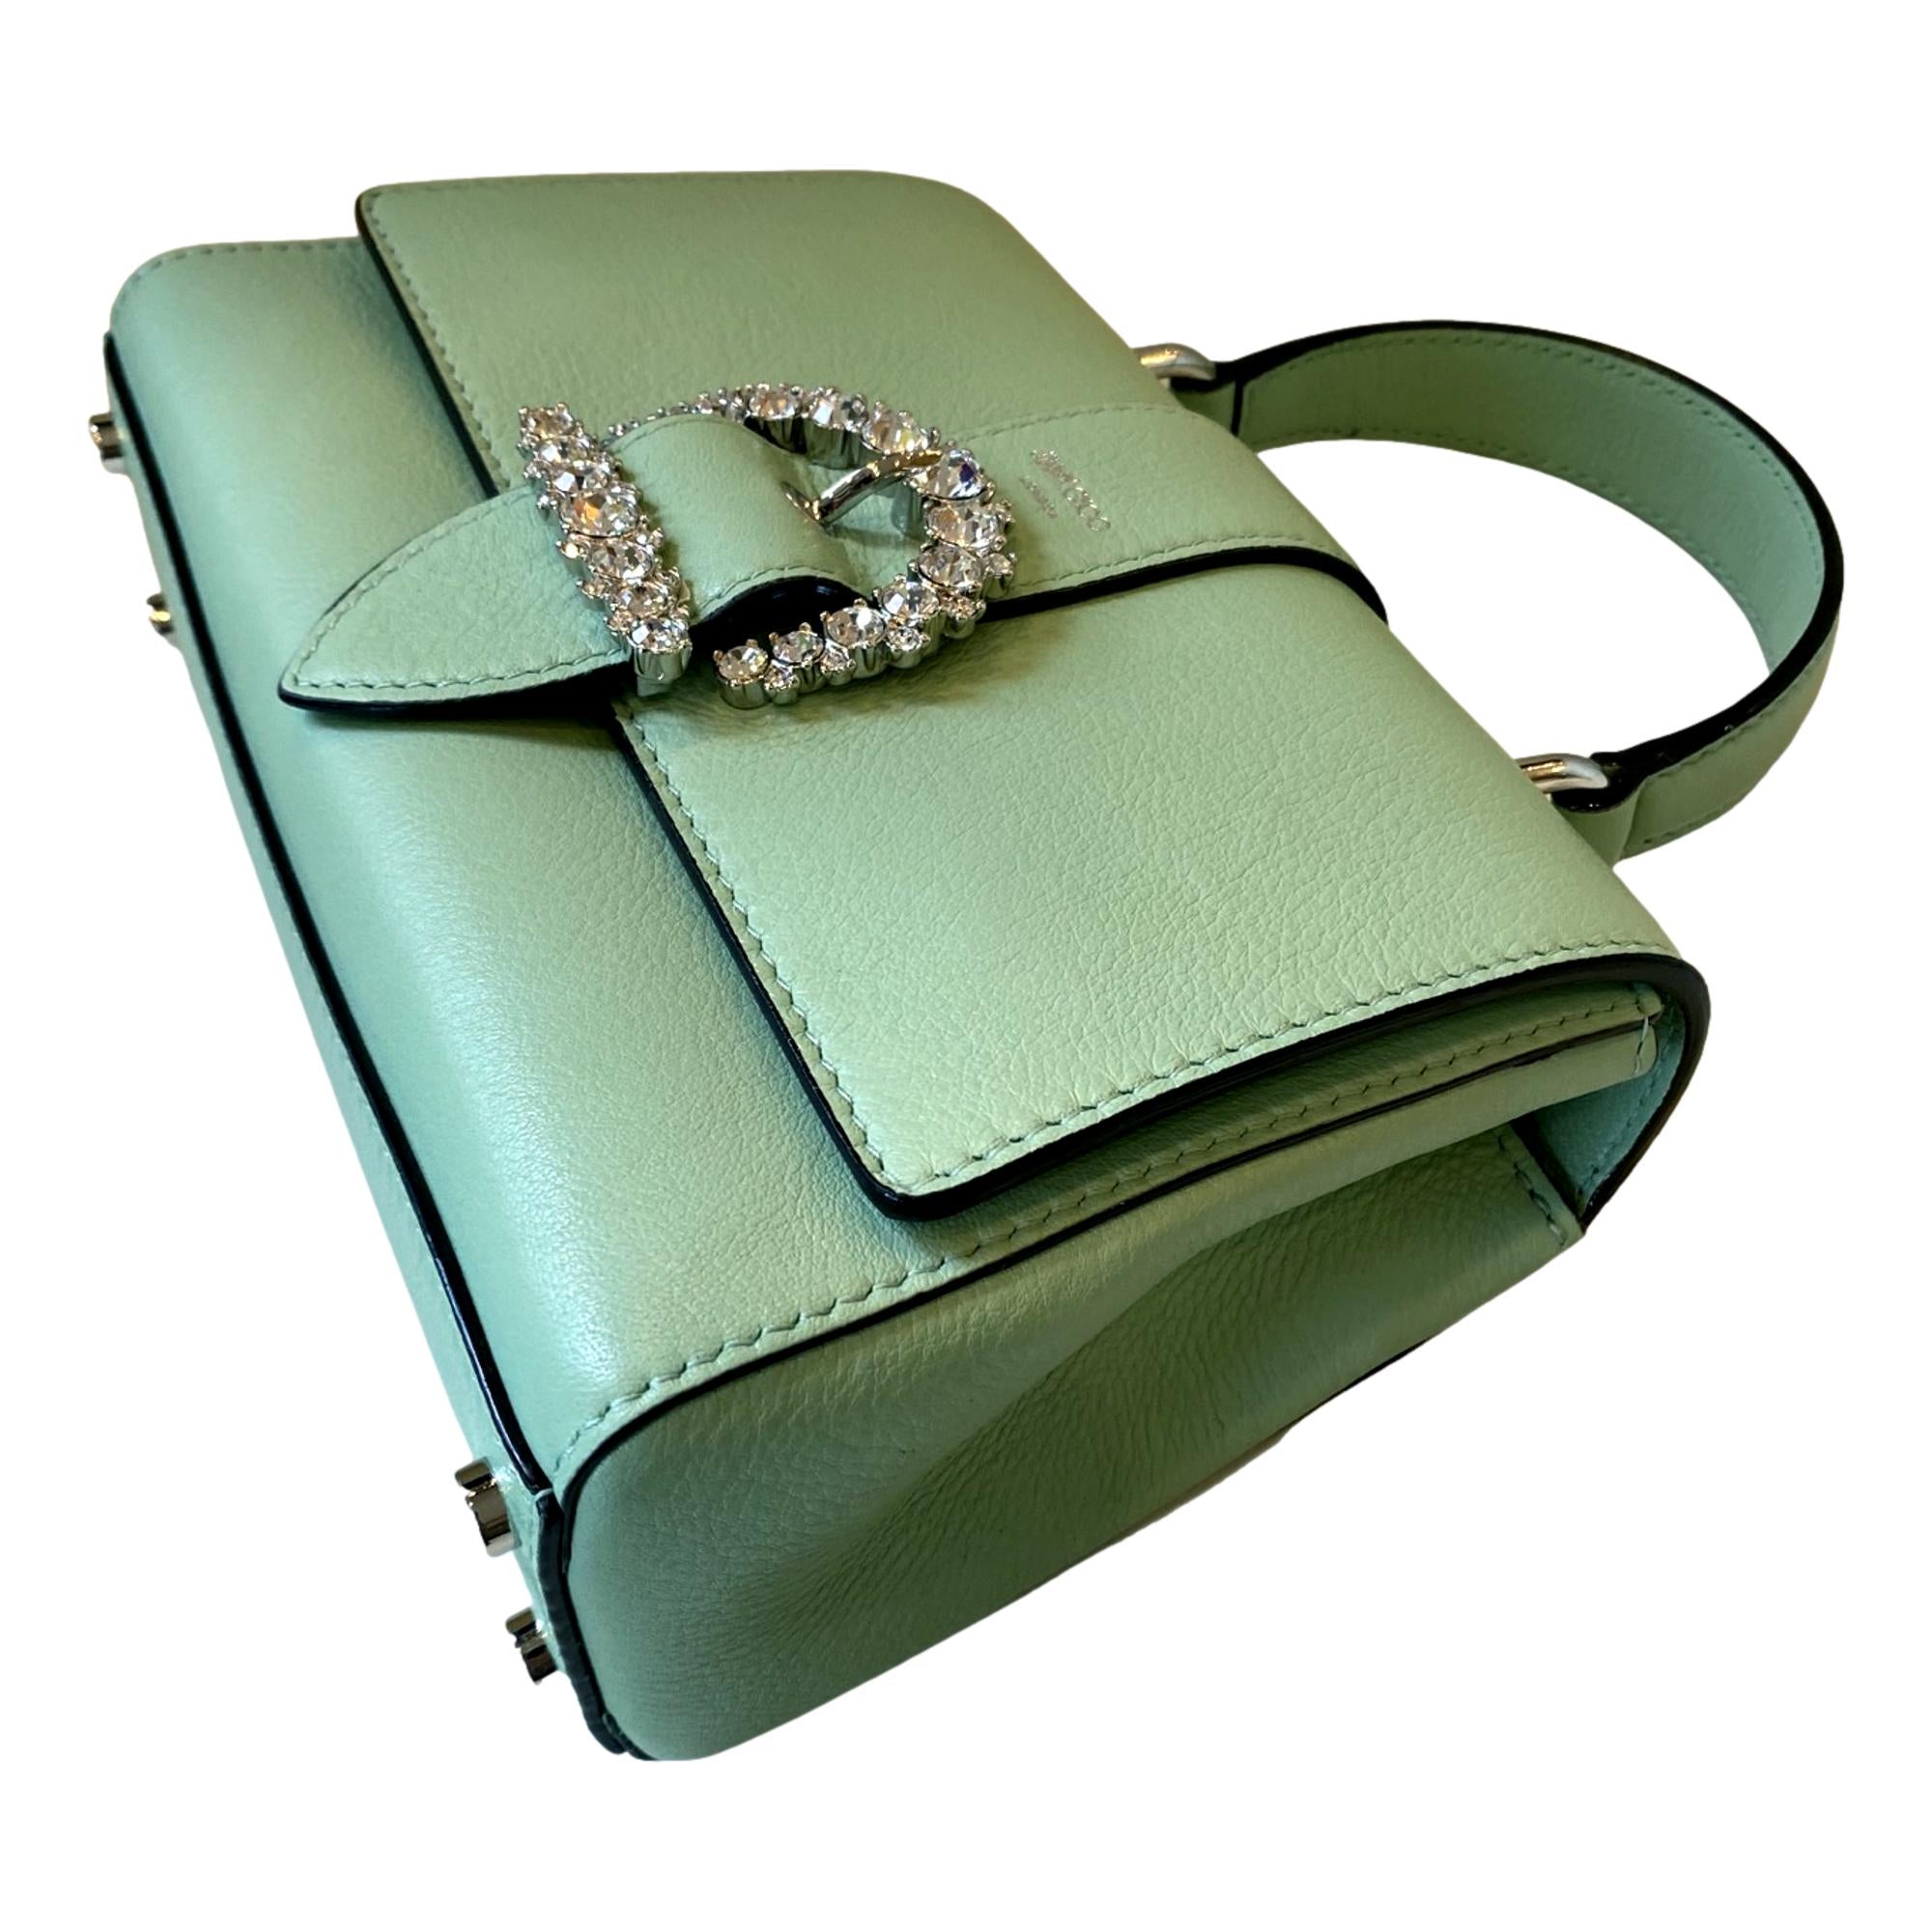 Jimmy Choo Cheri Mint Green Leather Top Handle Bag OSQM | 028 at_Queen_Bee_of_Beverly_Hills